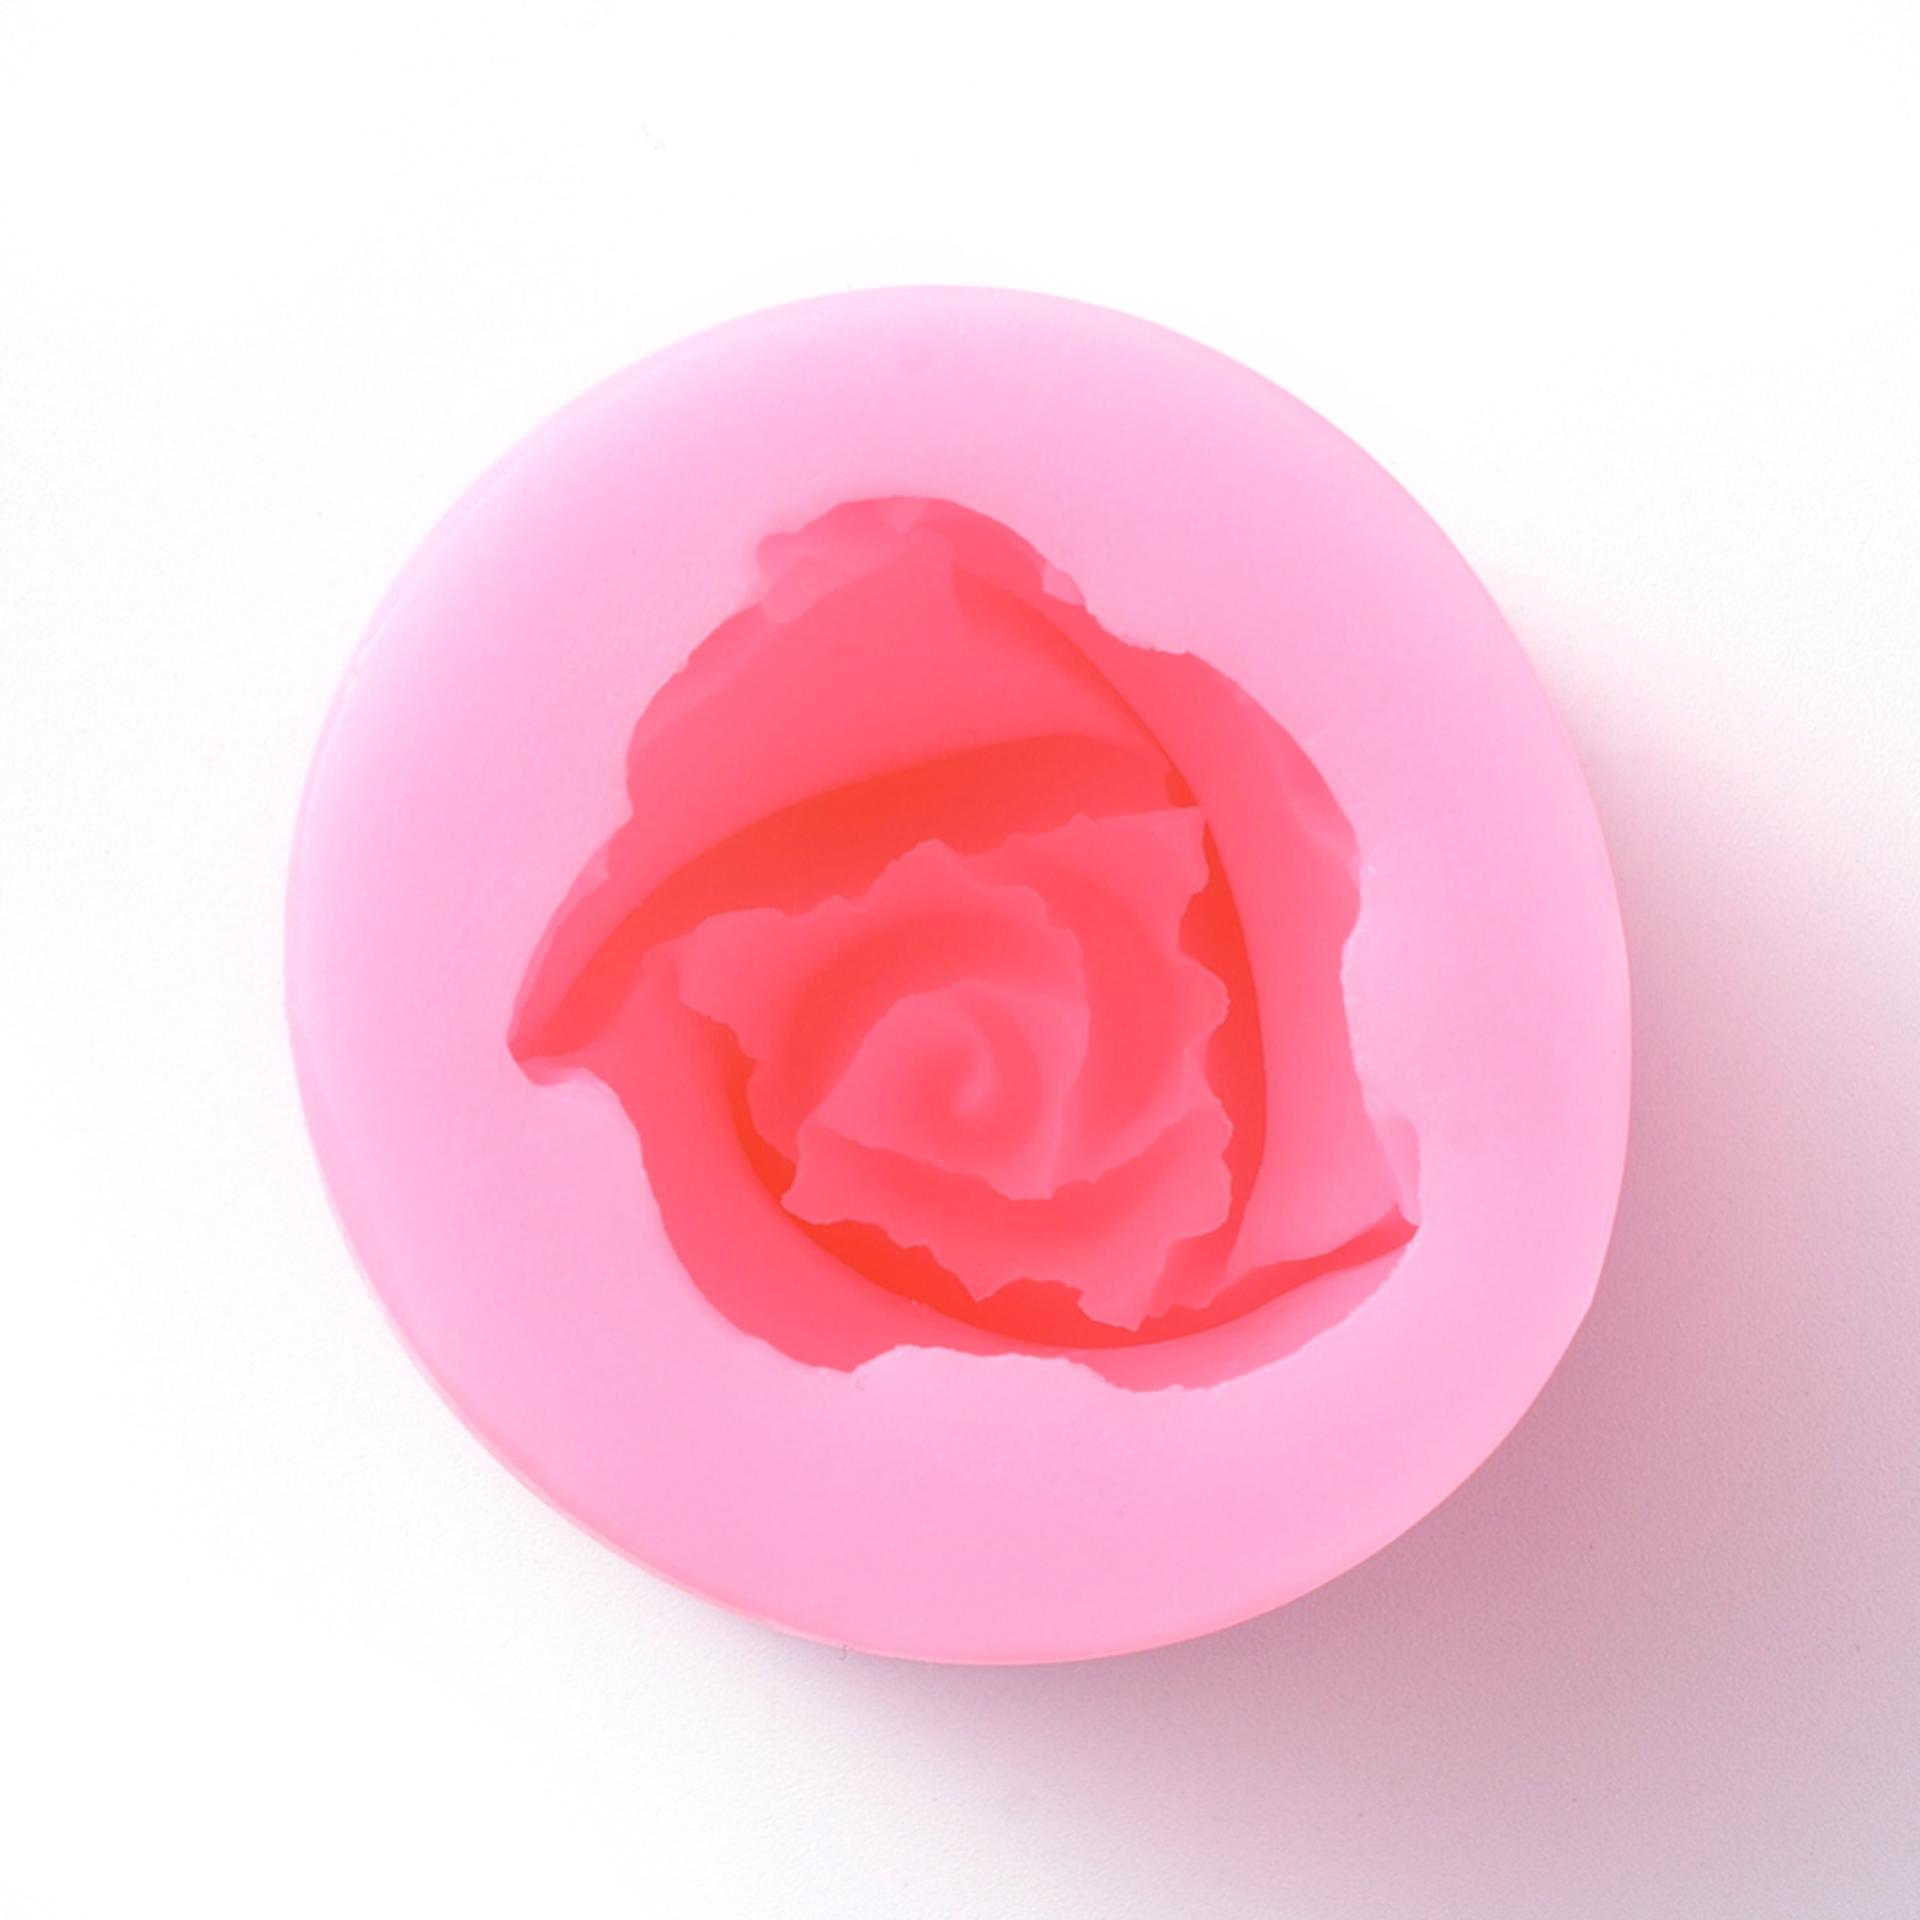 Molds - Rose Casting Molds - Multiple Sizes and types - for Baking, Candle Molds, for Epoxy, Clay or other casting medium